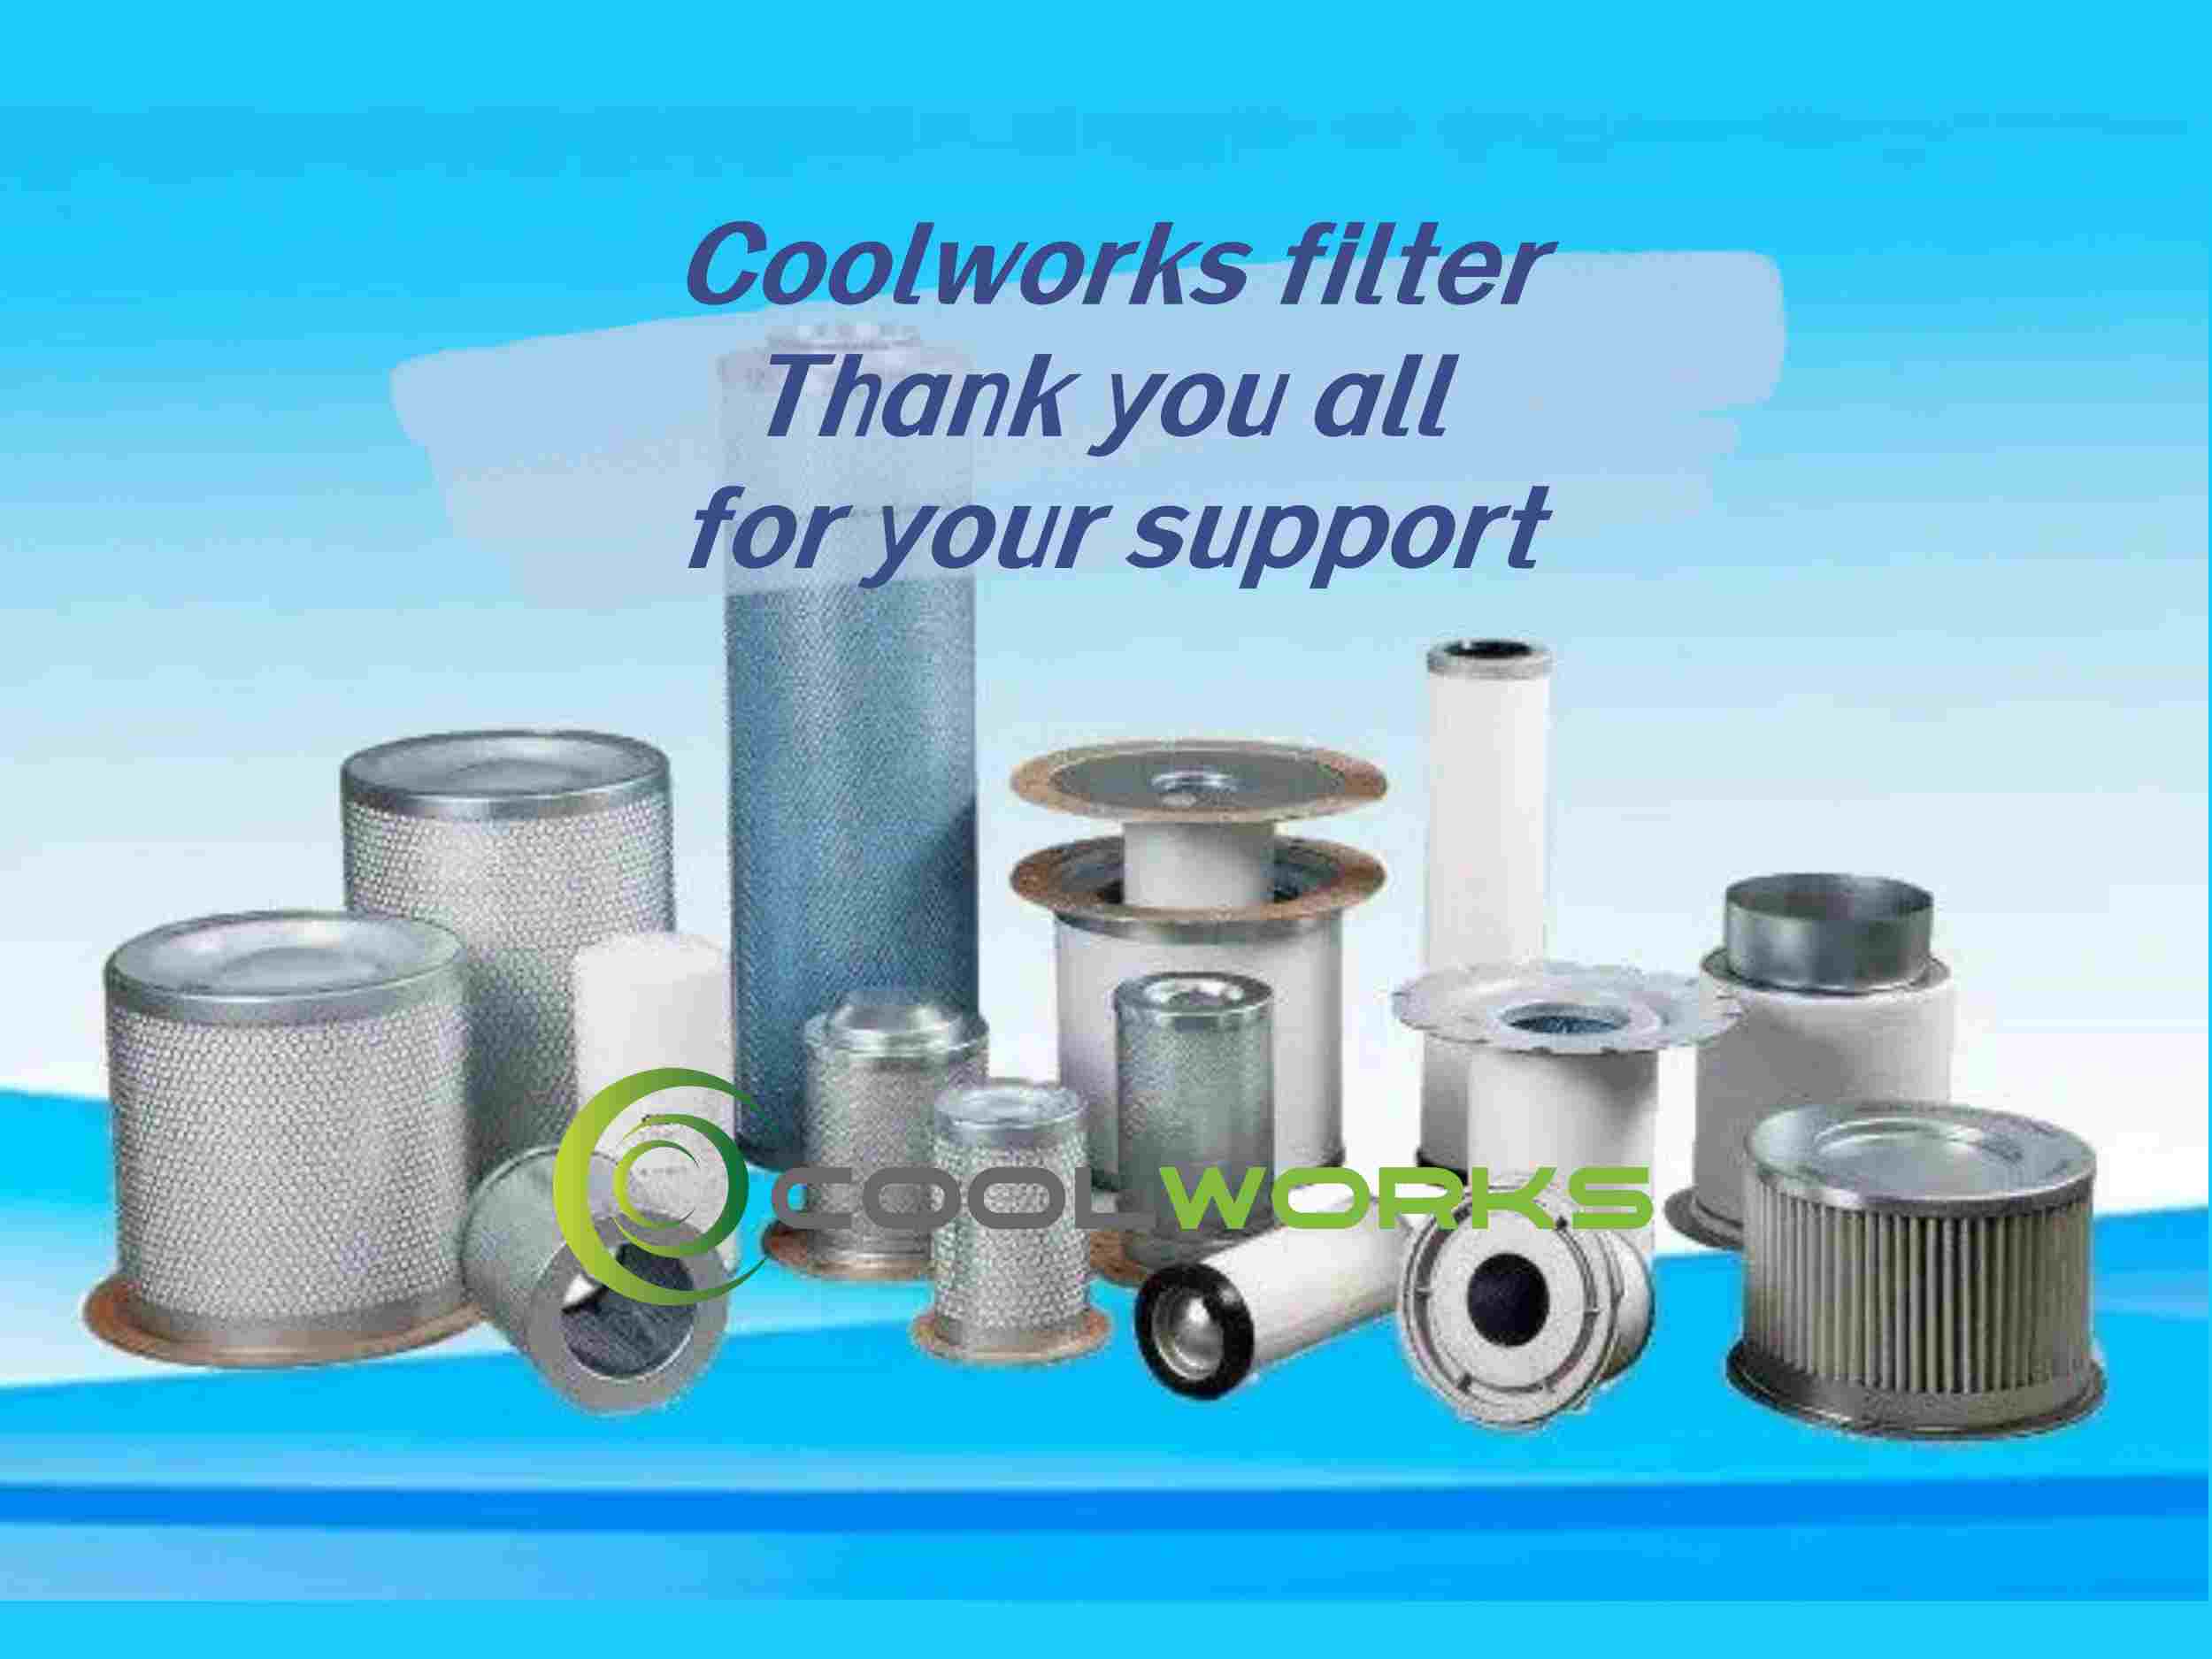 Coolworks Filter, By constantly striving for better quality and lower prices.